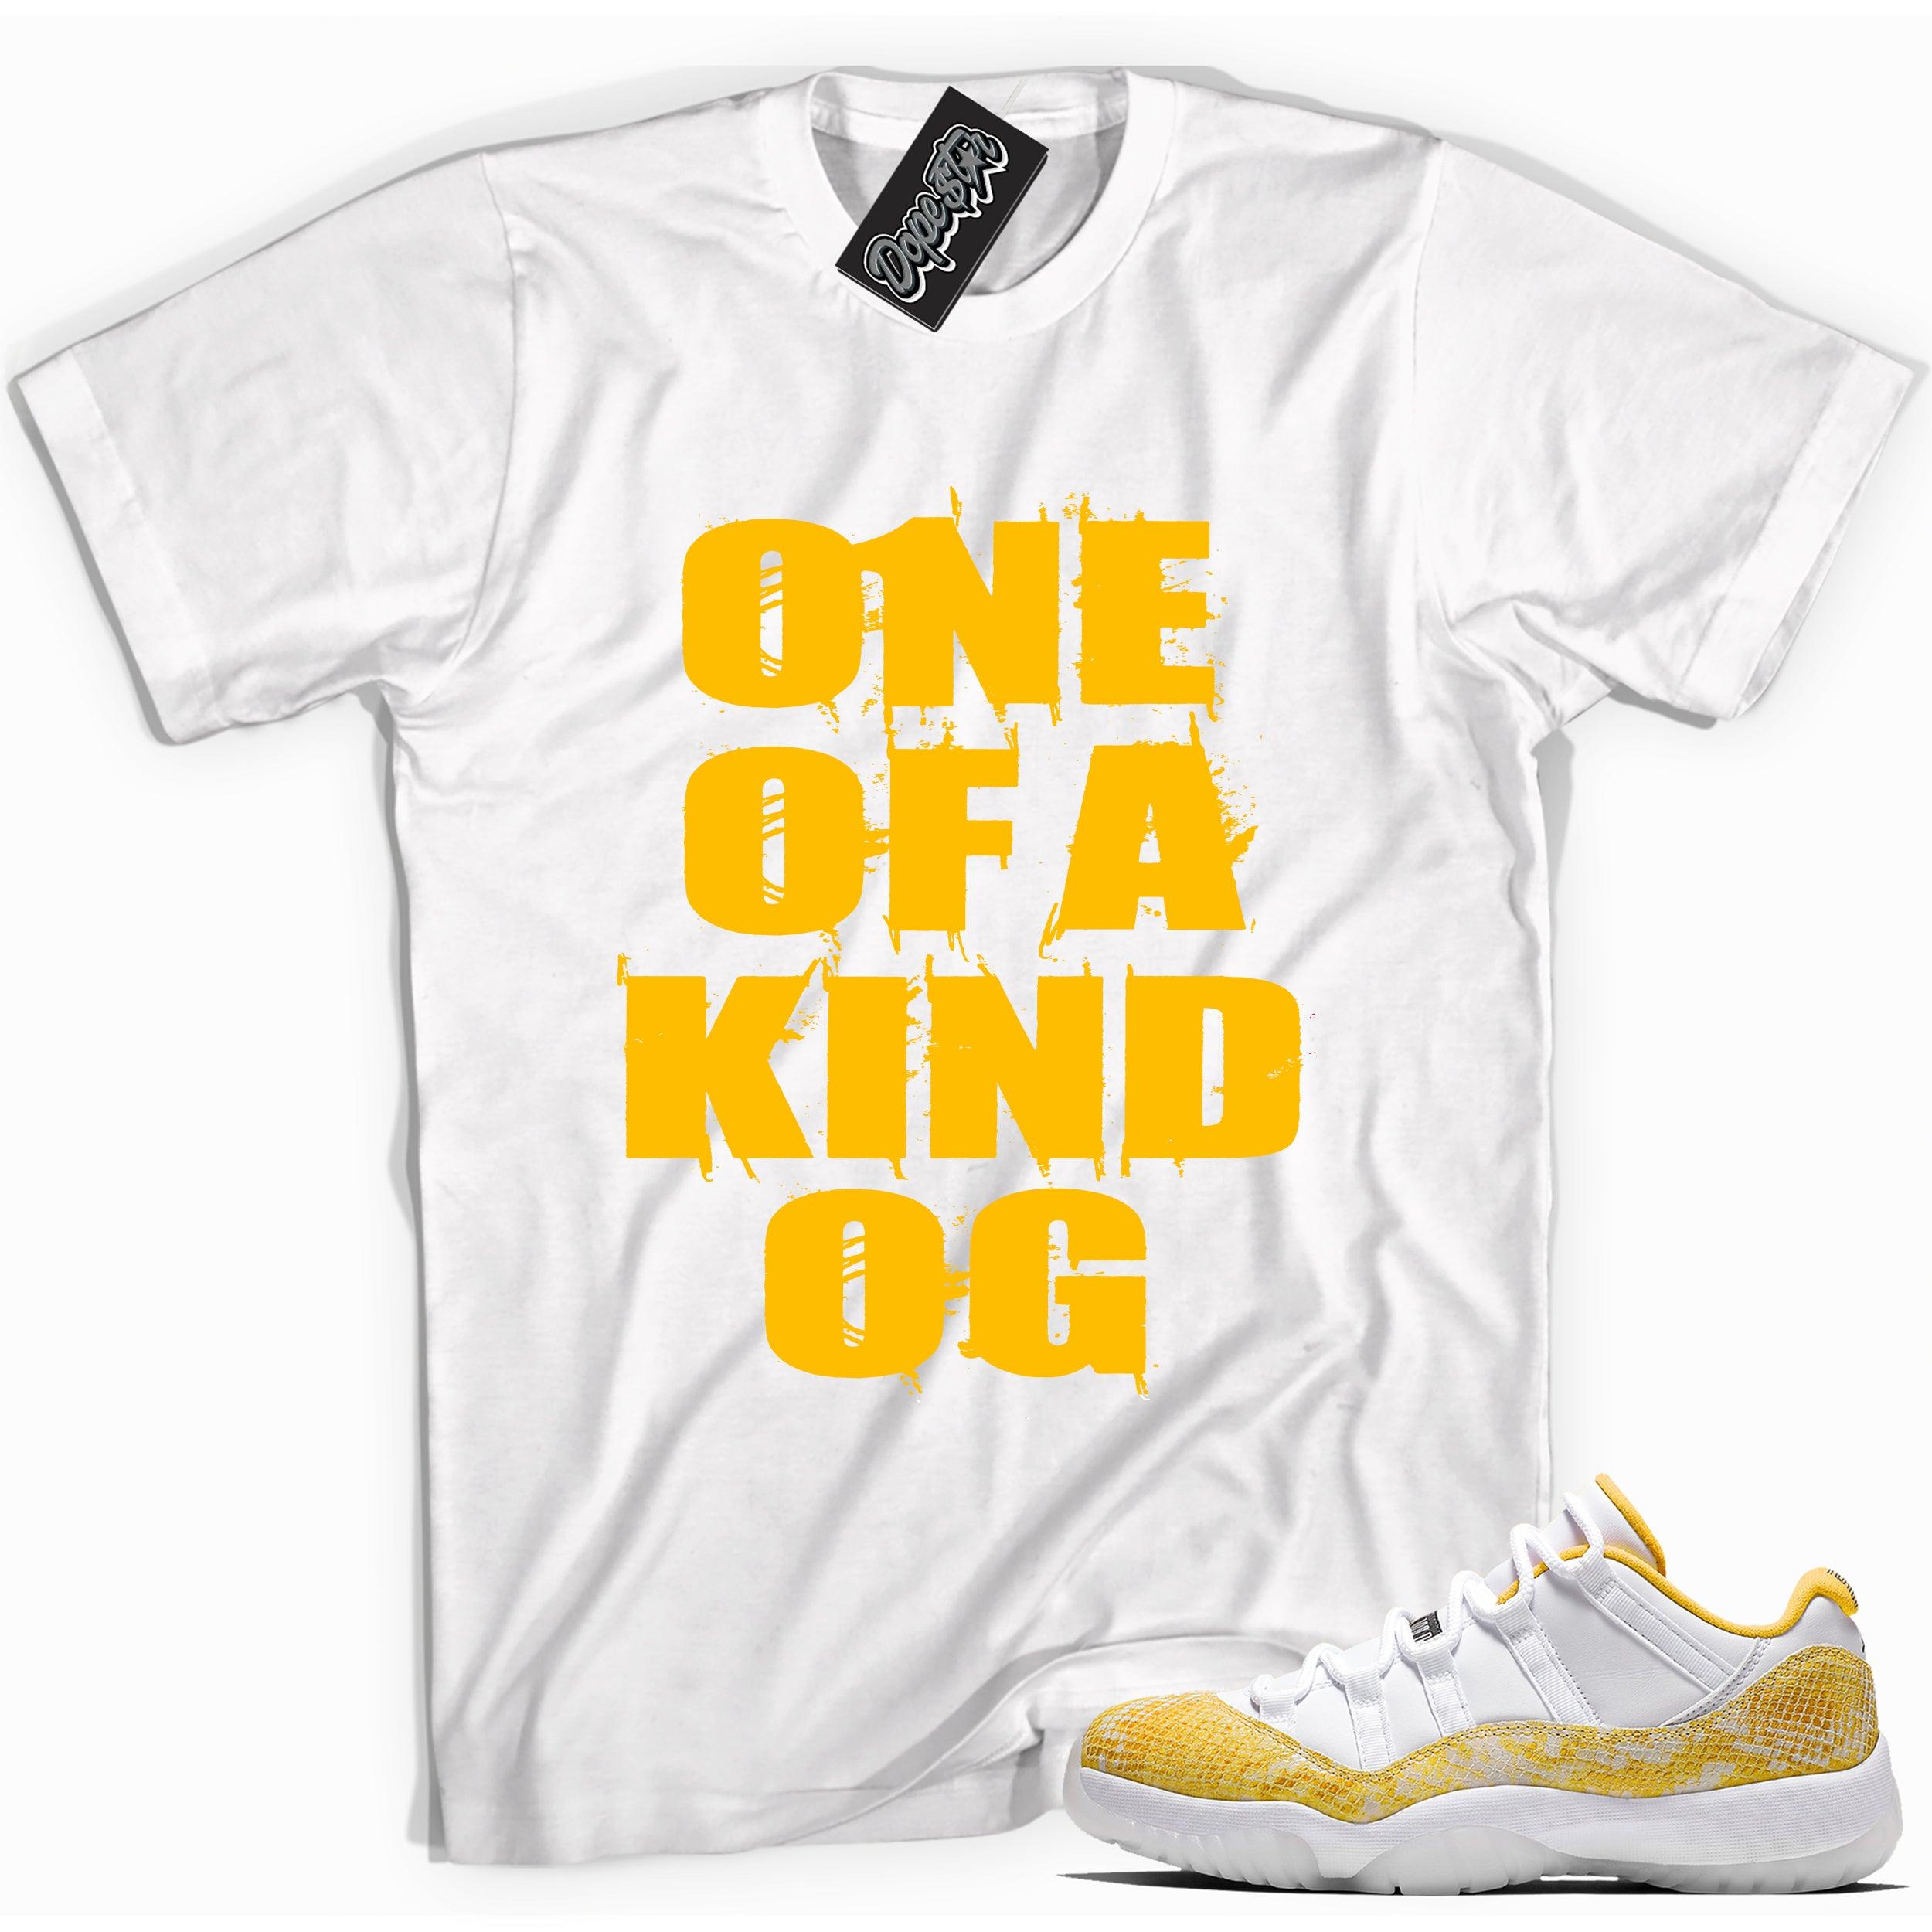 Cool white graphic tee with 'one of a kind' print, that perfectly matches Air Jordan 11 Retro Low Yellow Snakeskin sneakers